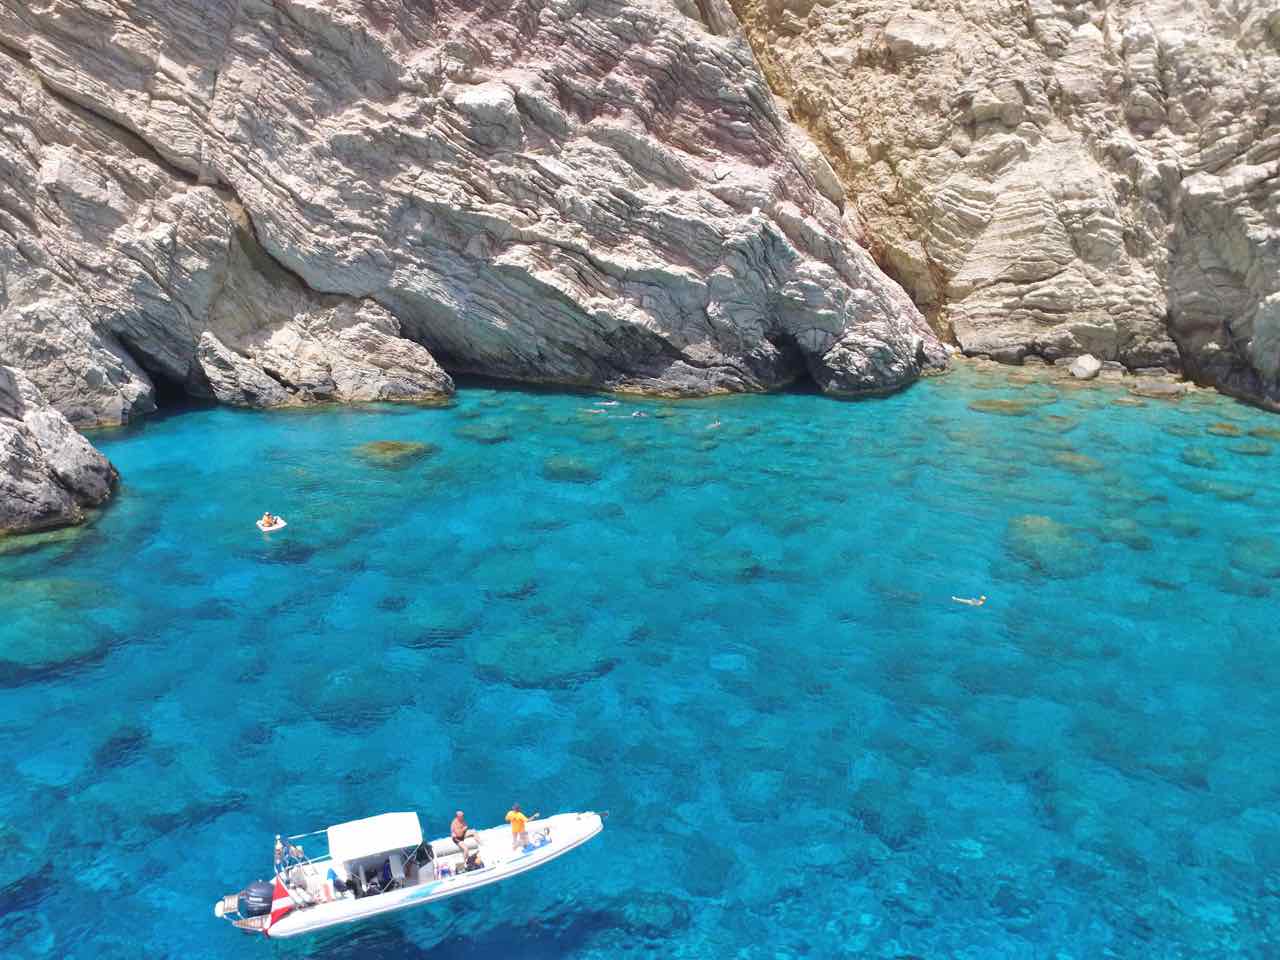 Gavdos Island Boat Round Trip, best boat trip to gavdos island, best boat trips sfakia crete, south chania activities, south chania, things to do sfakia chania, explore the island of gavdos, daily cruise gavdos island